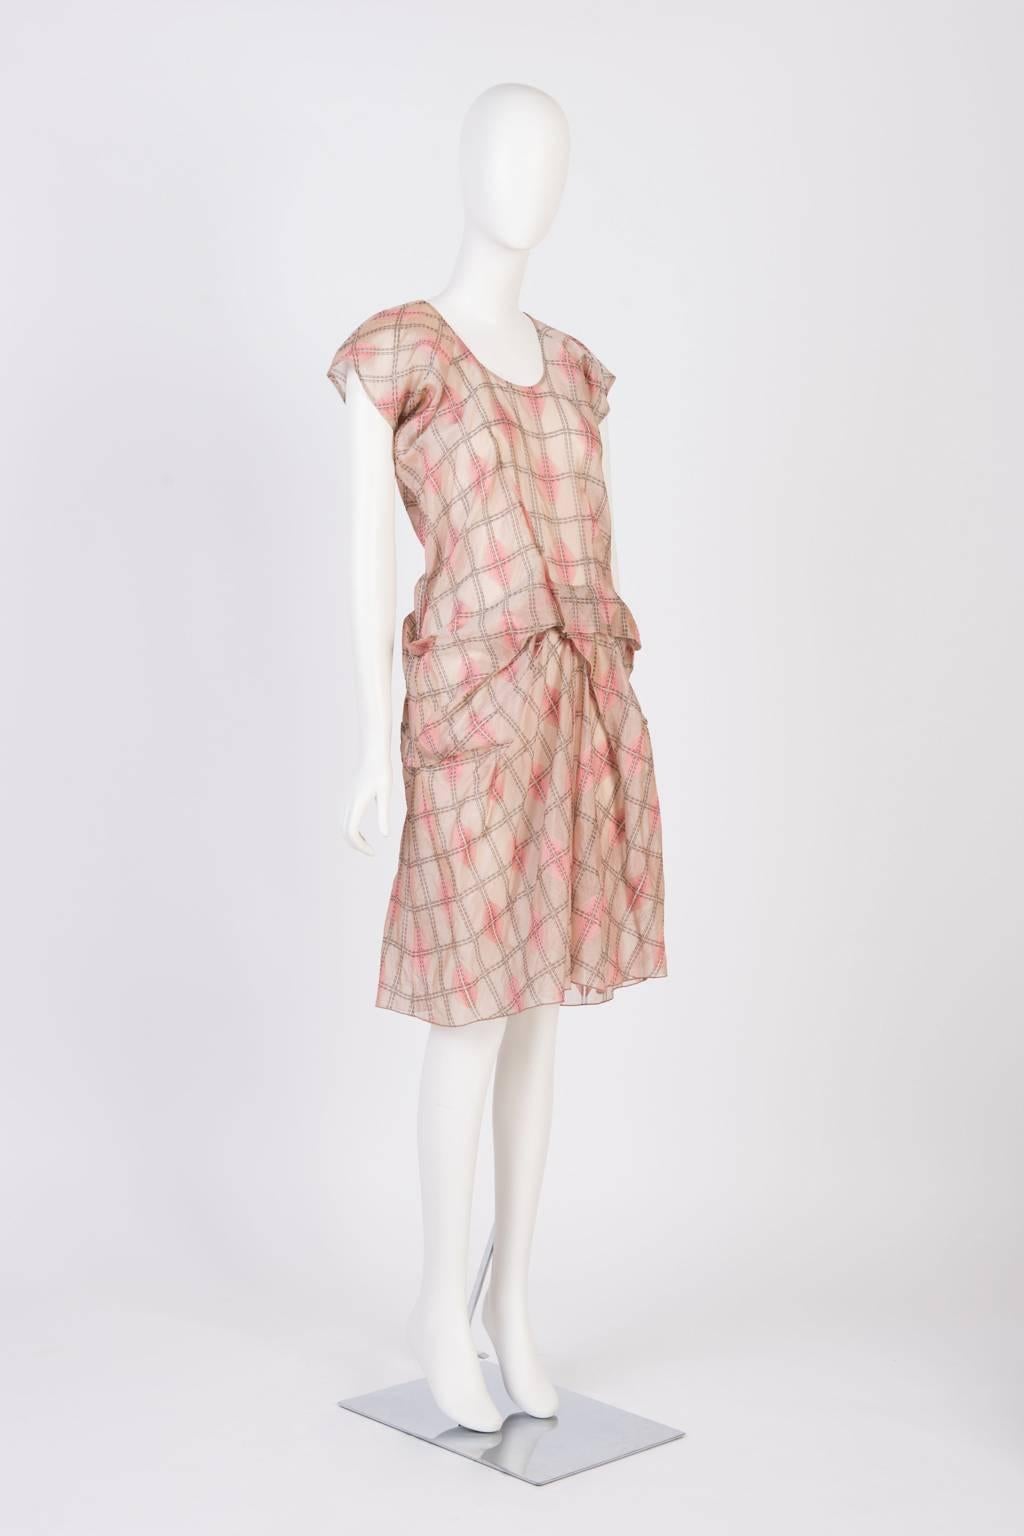  Knee length dress, embroidered and ruched at waist, in pink silk blend.